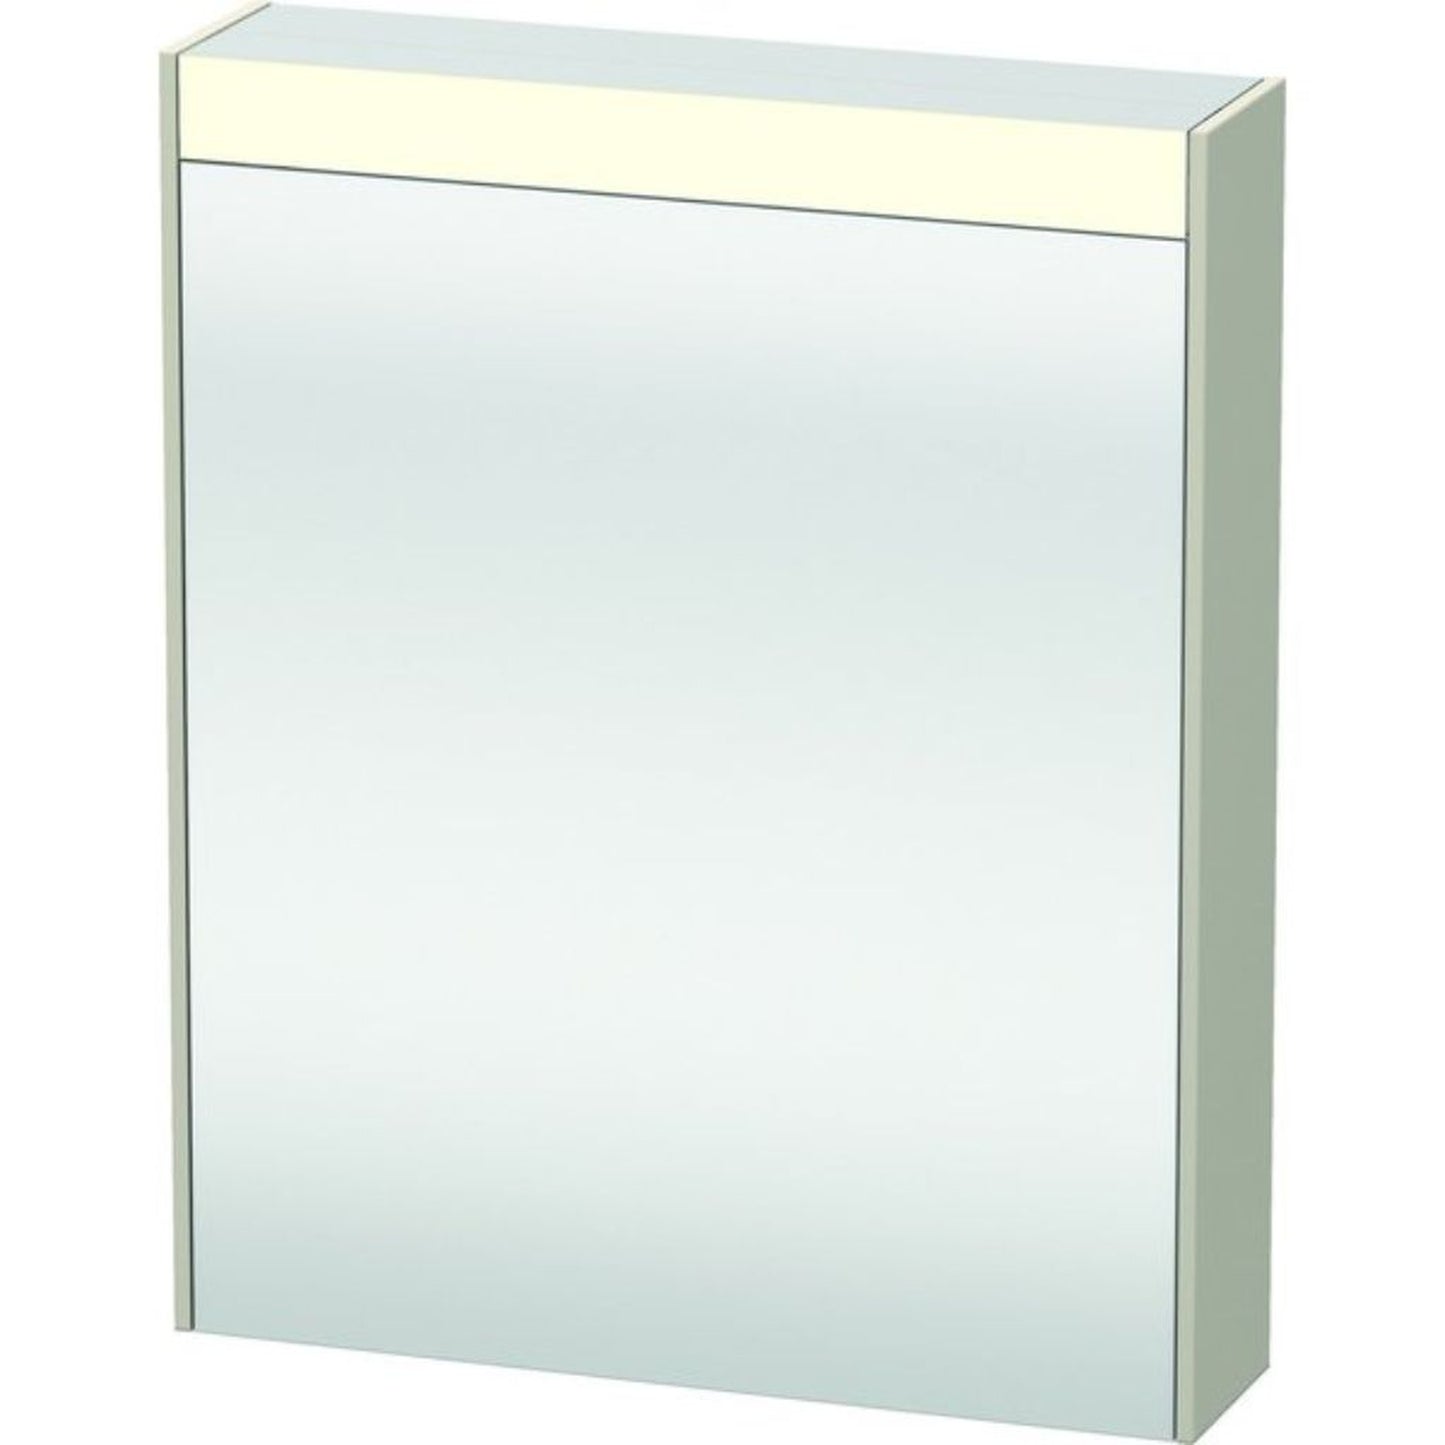 Duravit Brioso 24" x 30" x 6" Mirror With Left Hinge Cabinet and Lighting Taupe